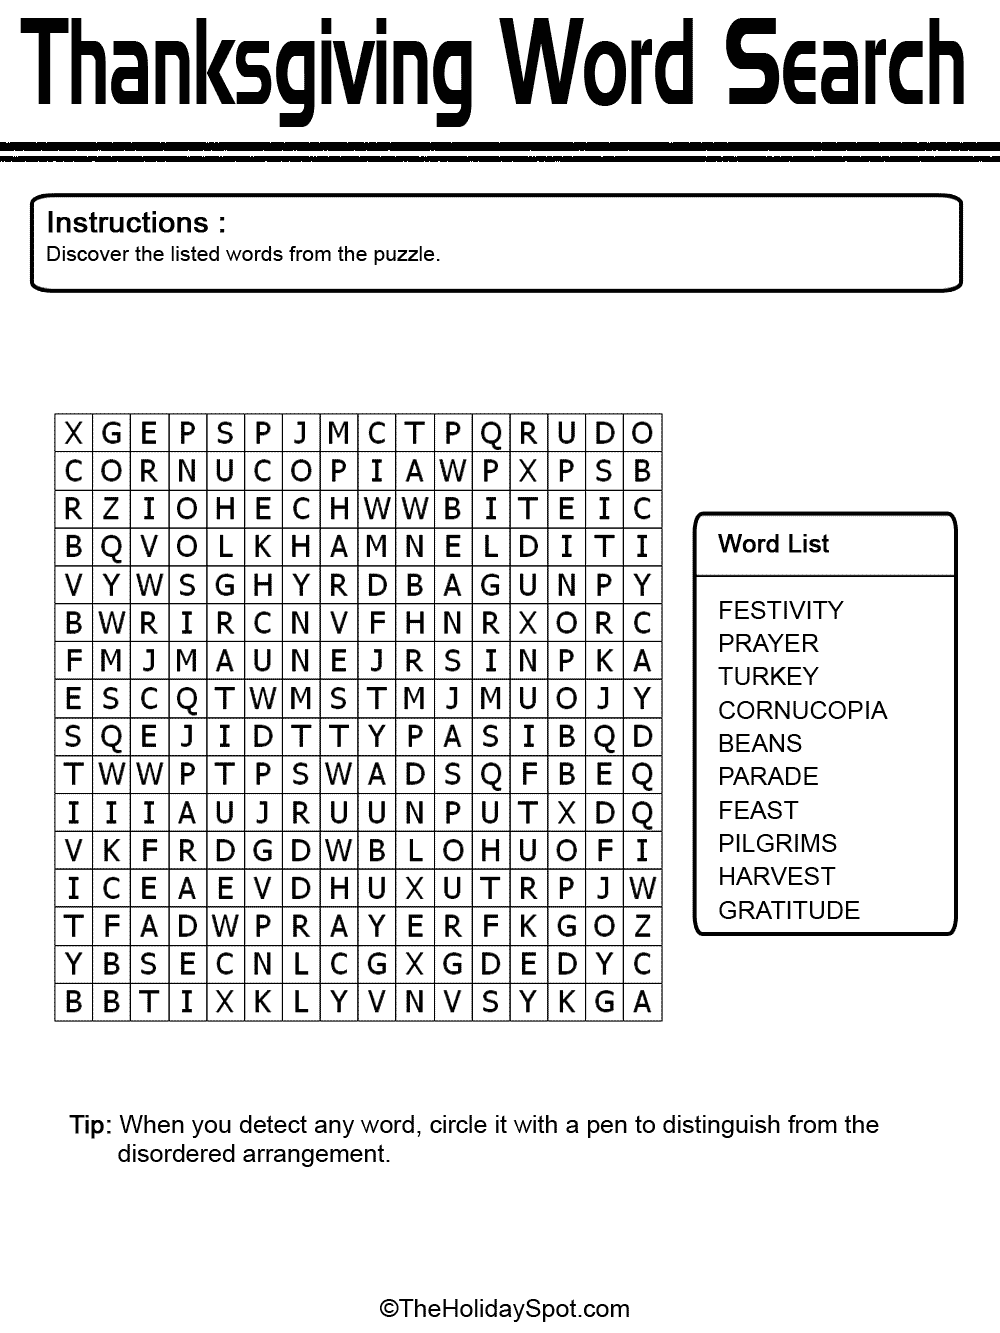 Word Search Template For Microsoft Word